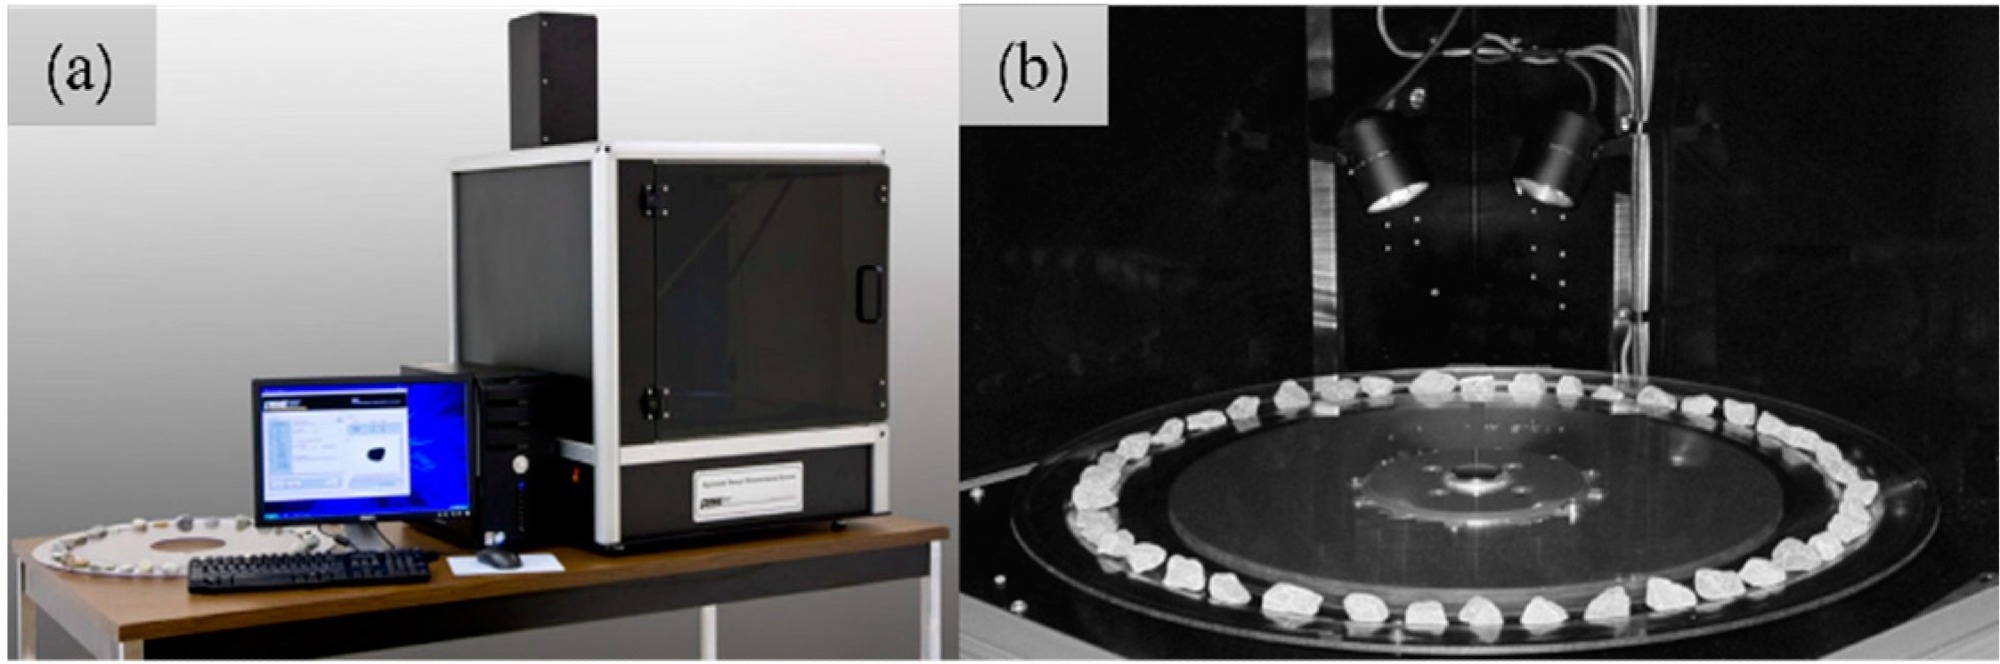 Aggregate image measurement system (a) and aggregates being tested (b).